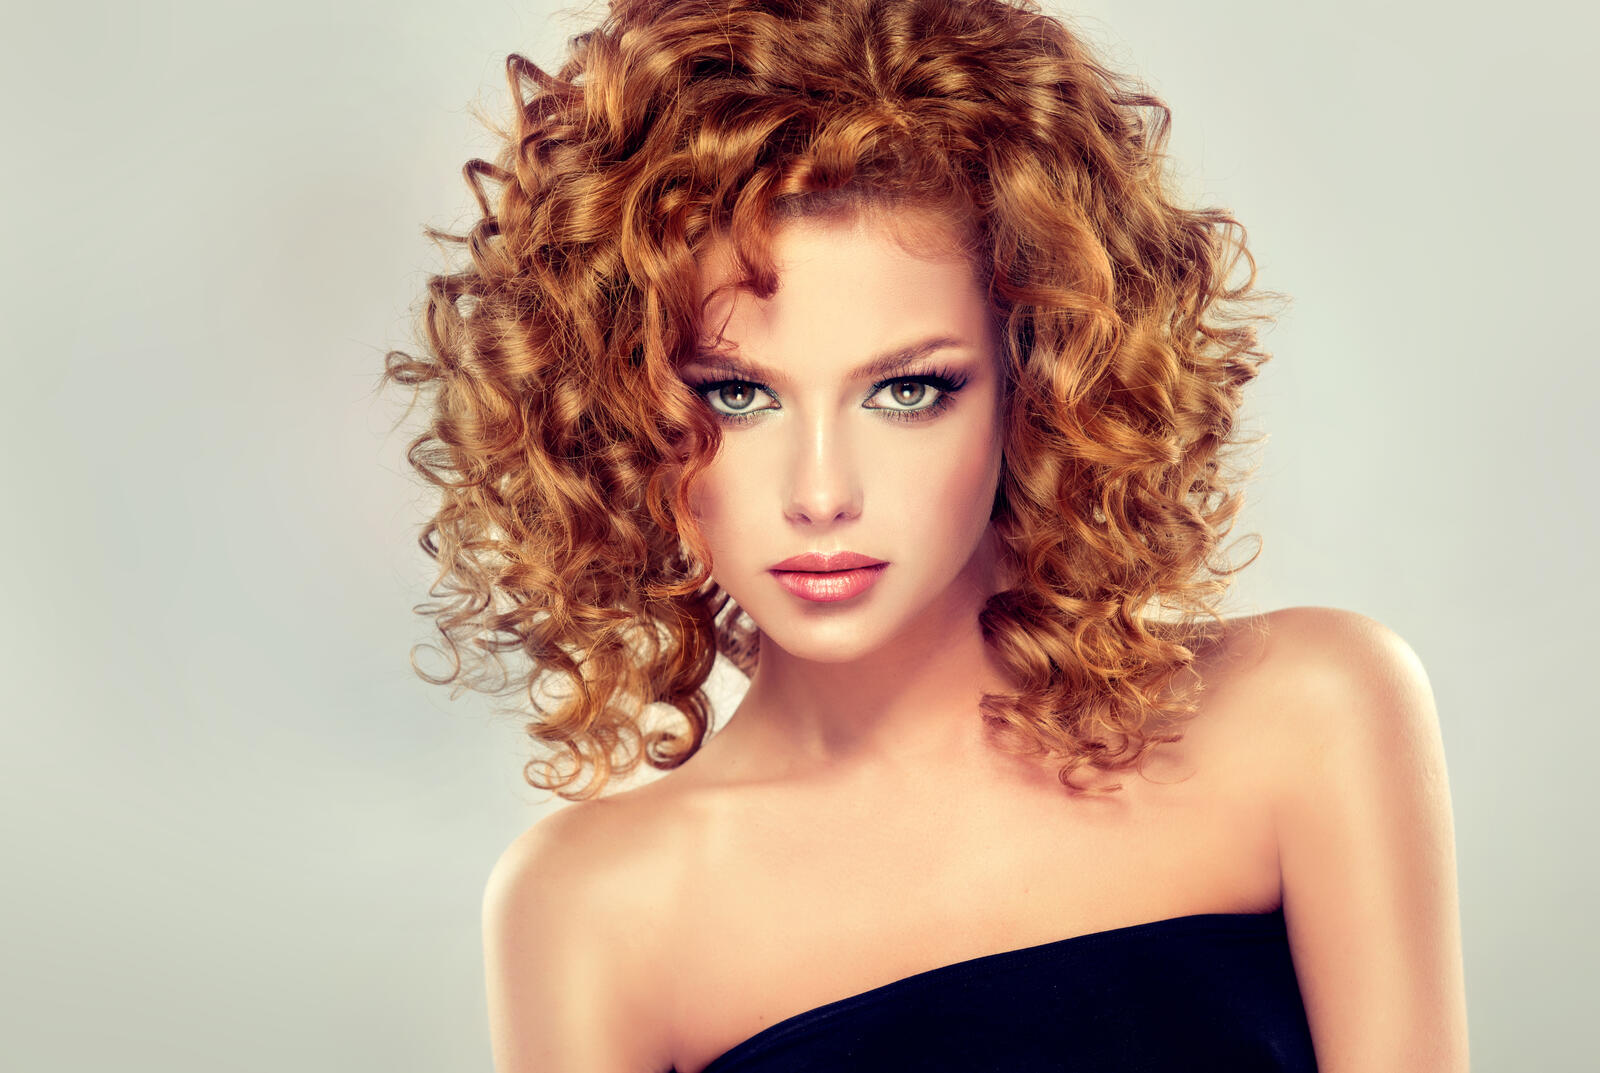 Wallpapers hairstyle curly hair girl on the desktop